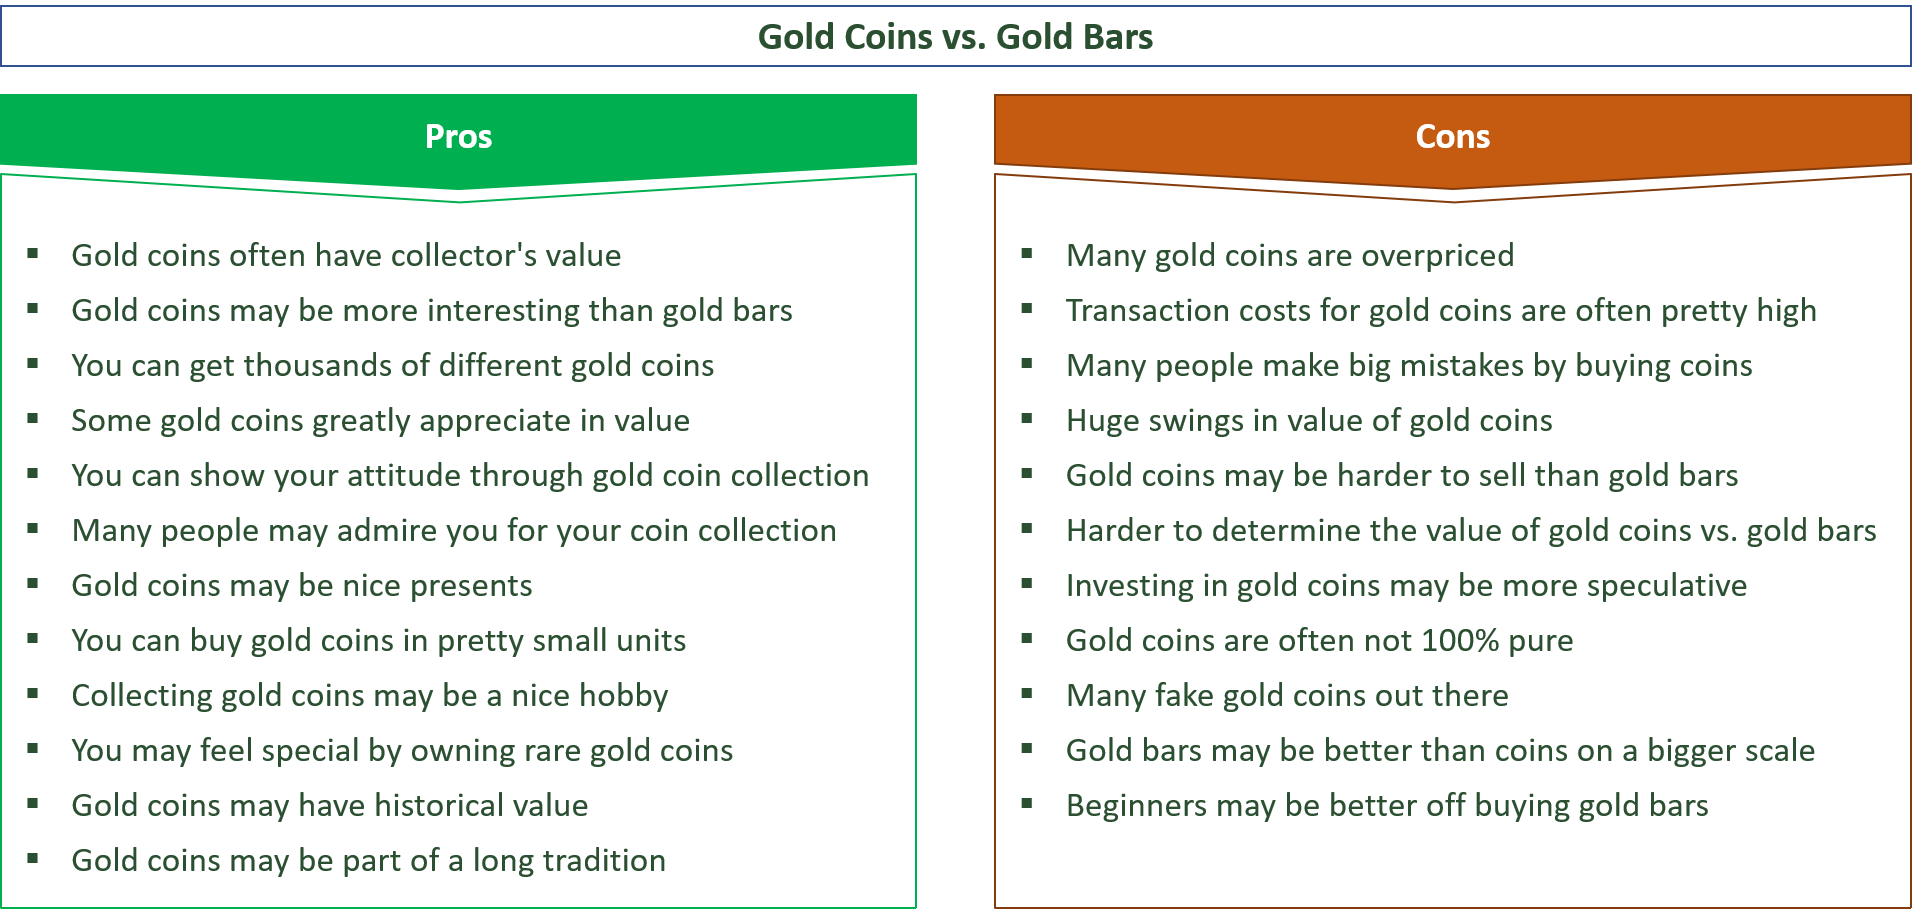 advantages and disadvantages of buying a gold coins vs. gold bars